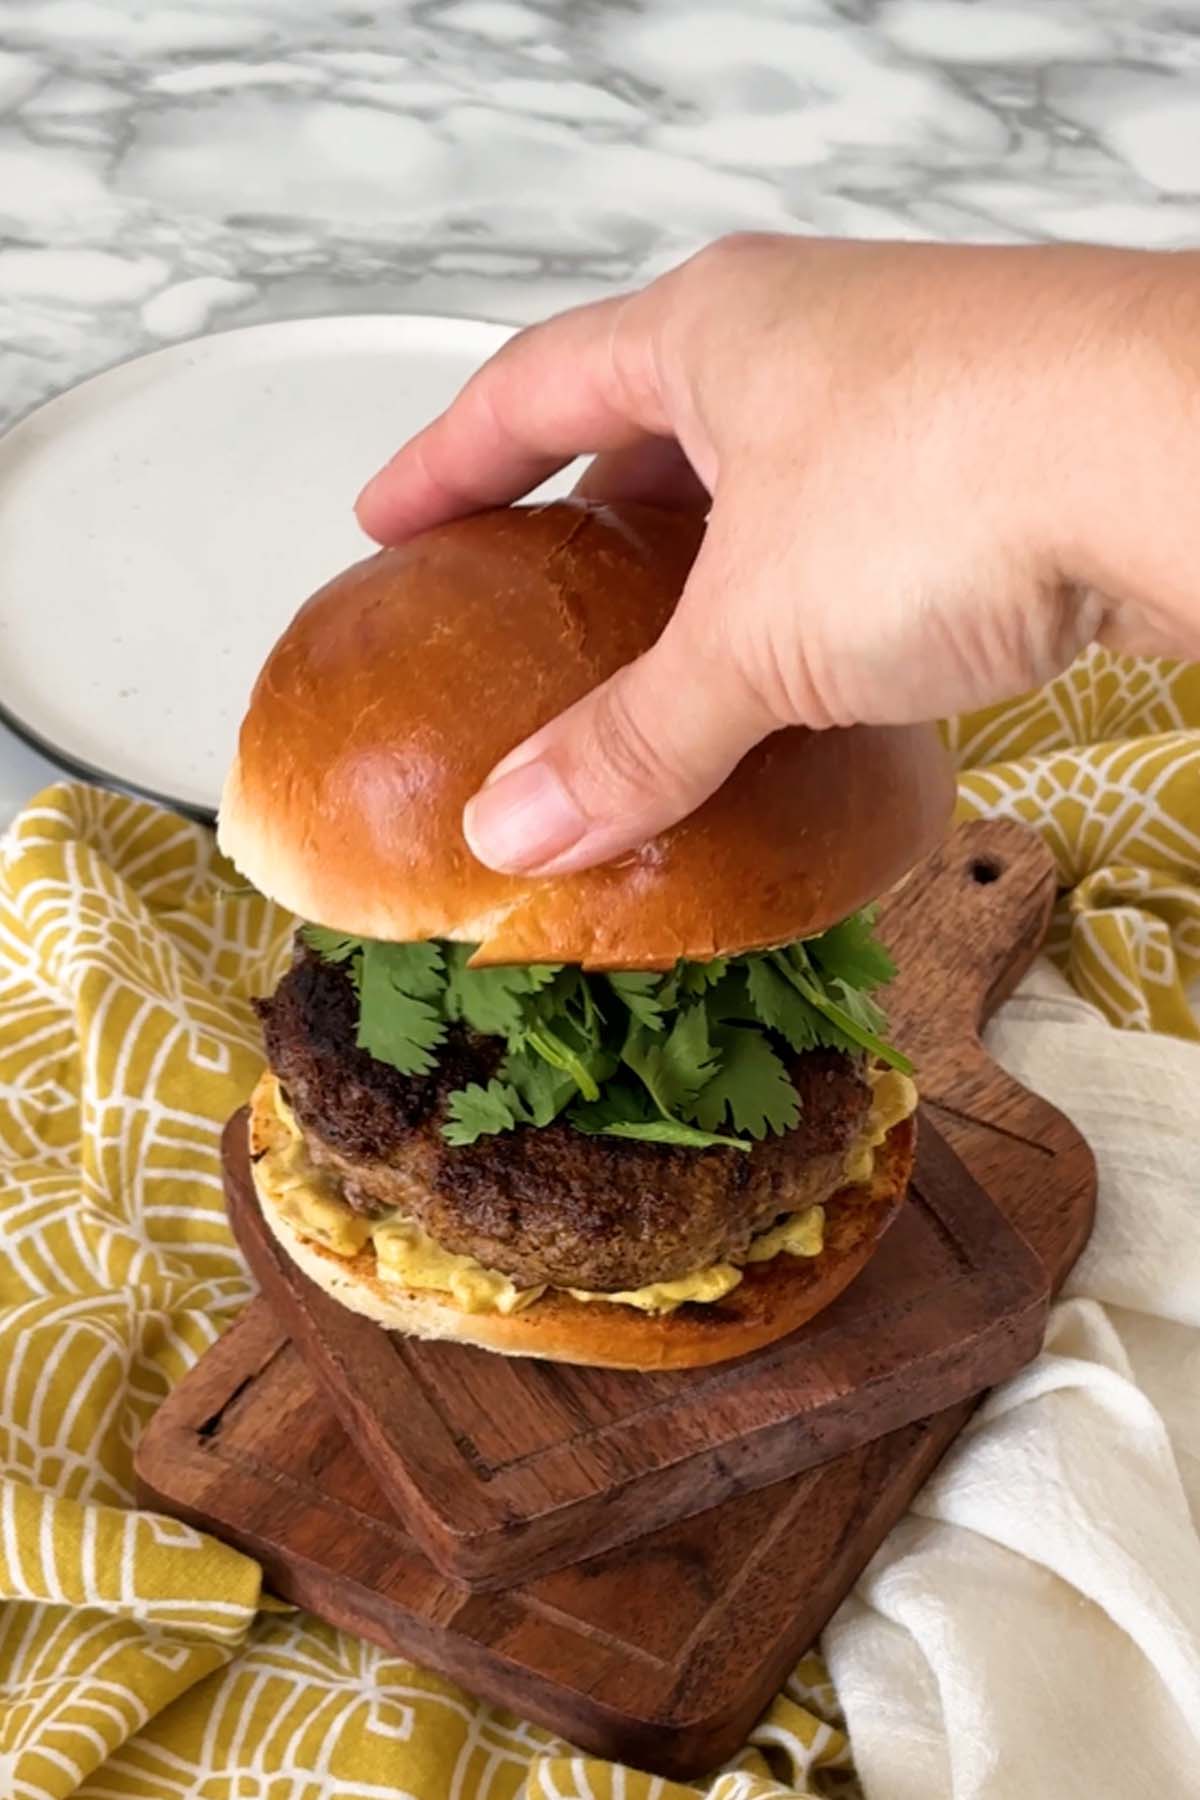 A top bun is added to a burger to close it.